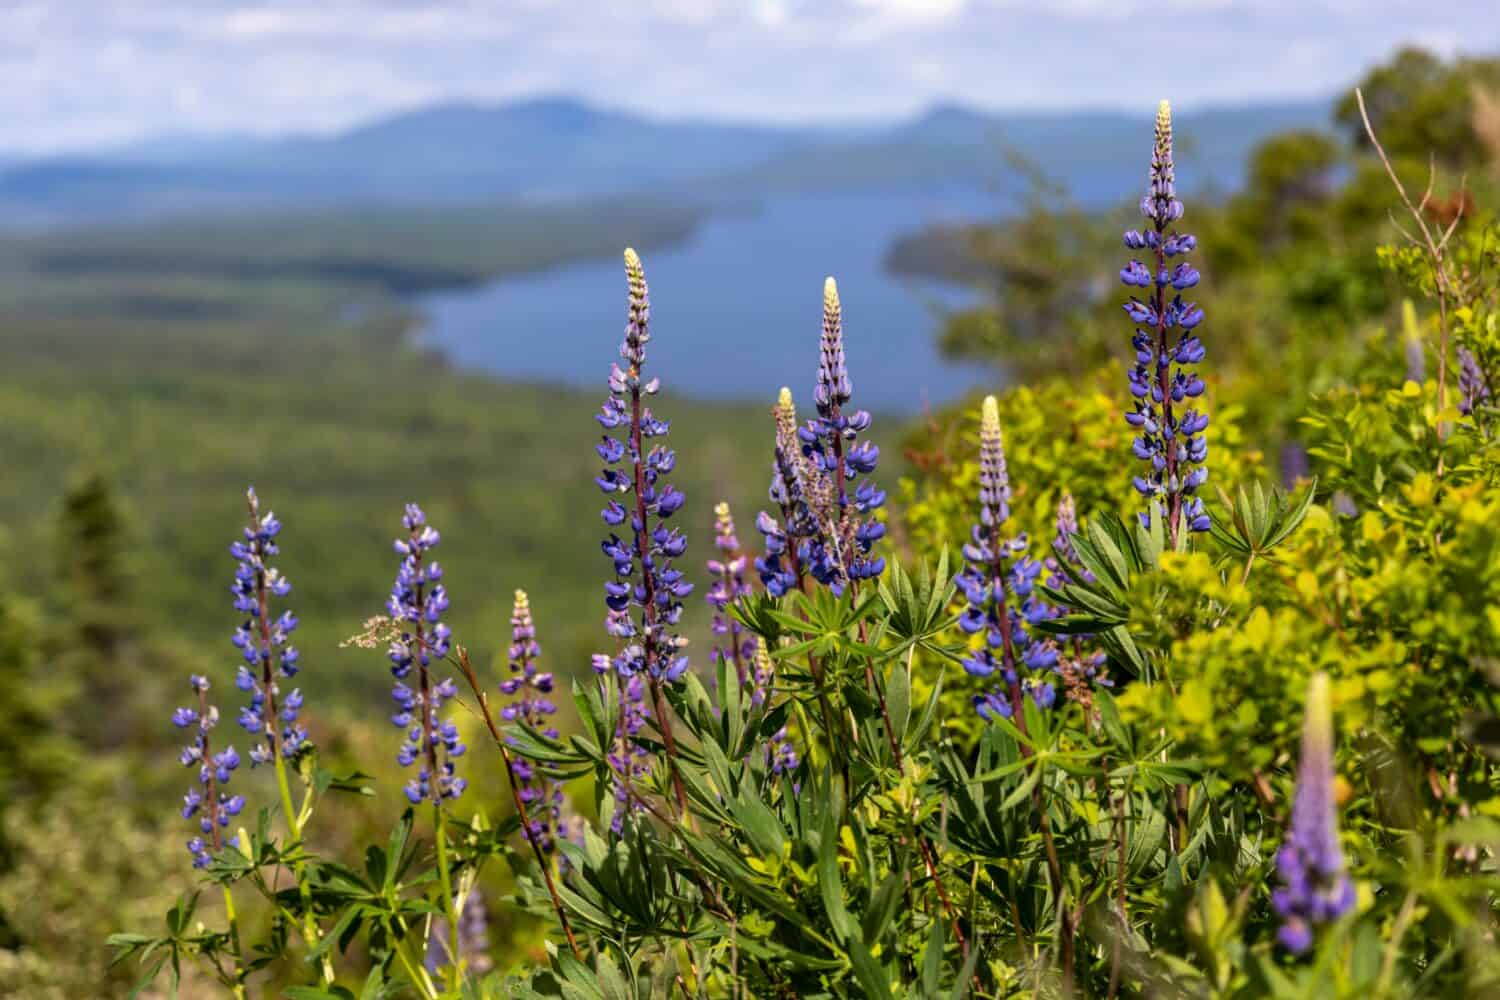 Lupines in full bloom along the Appalachian Trail at Height of Land. 